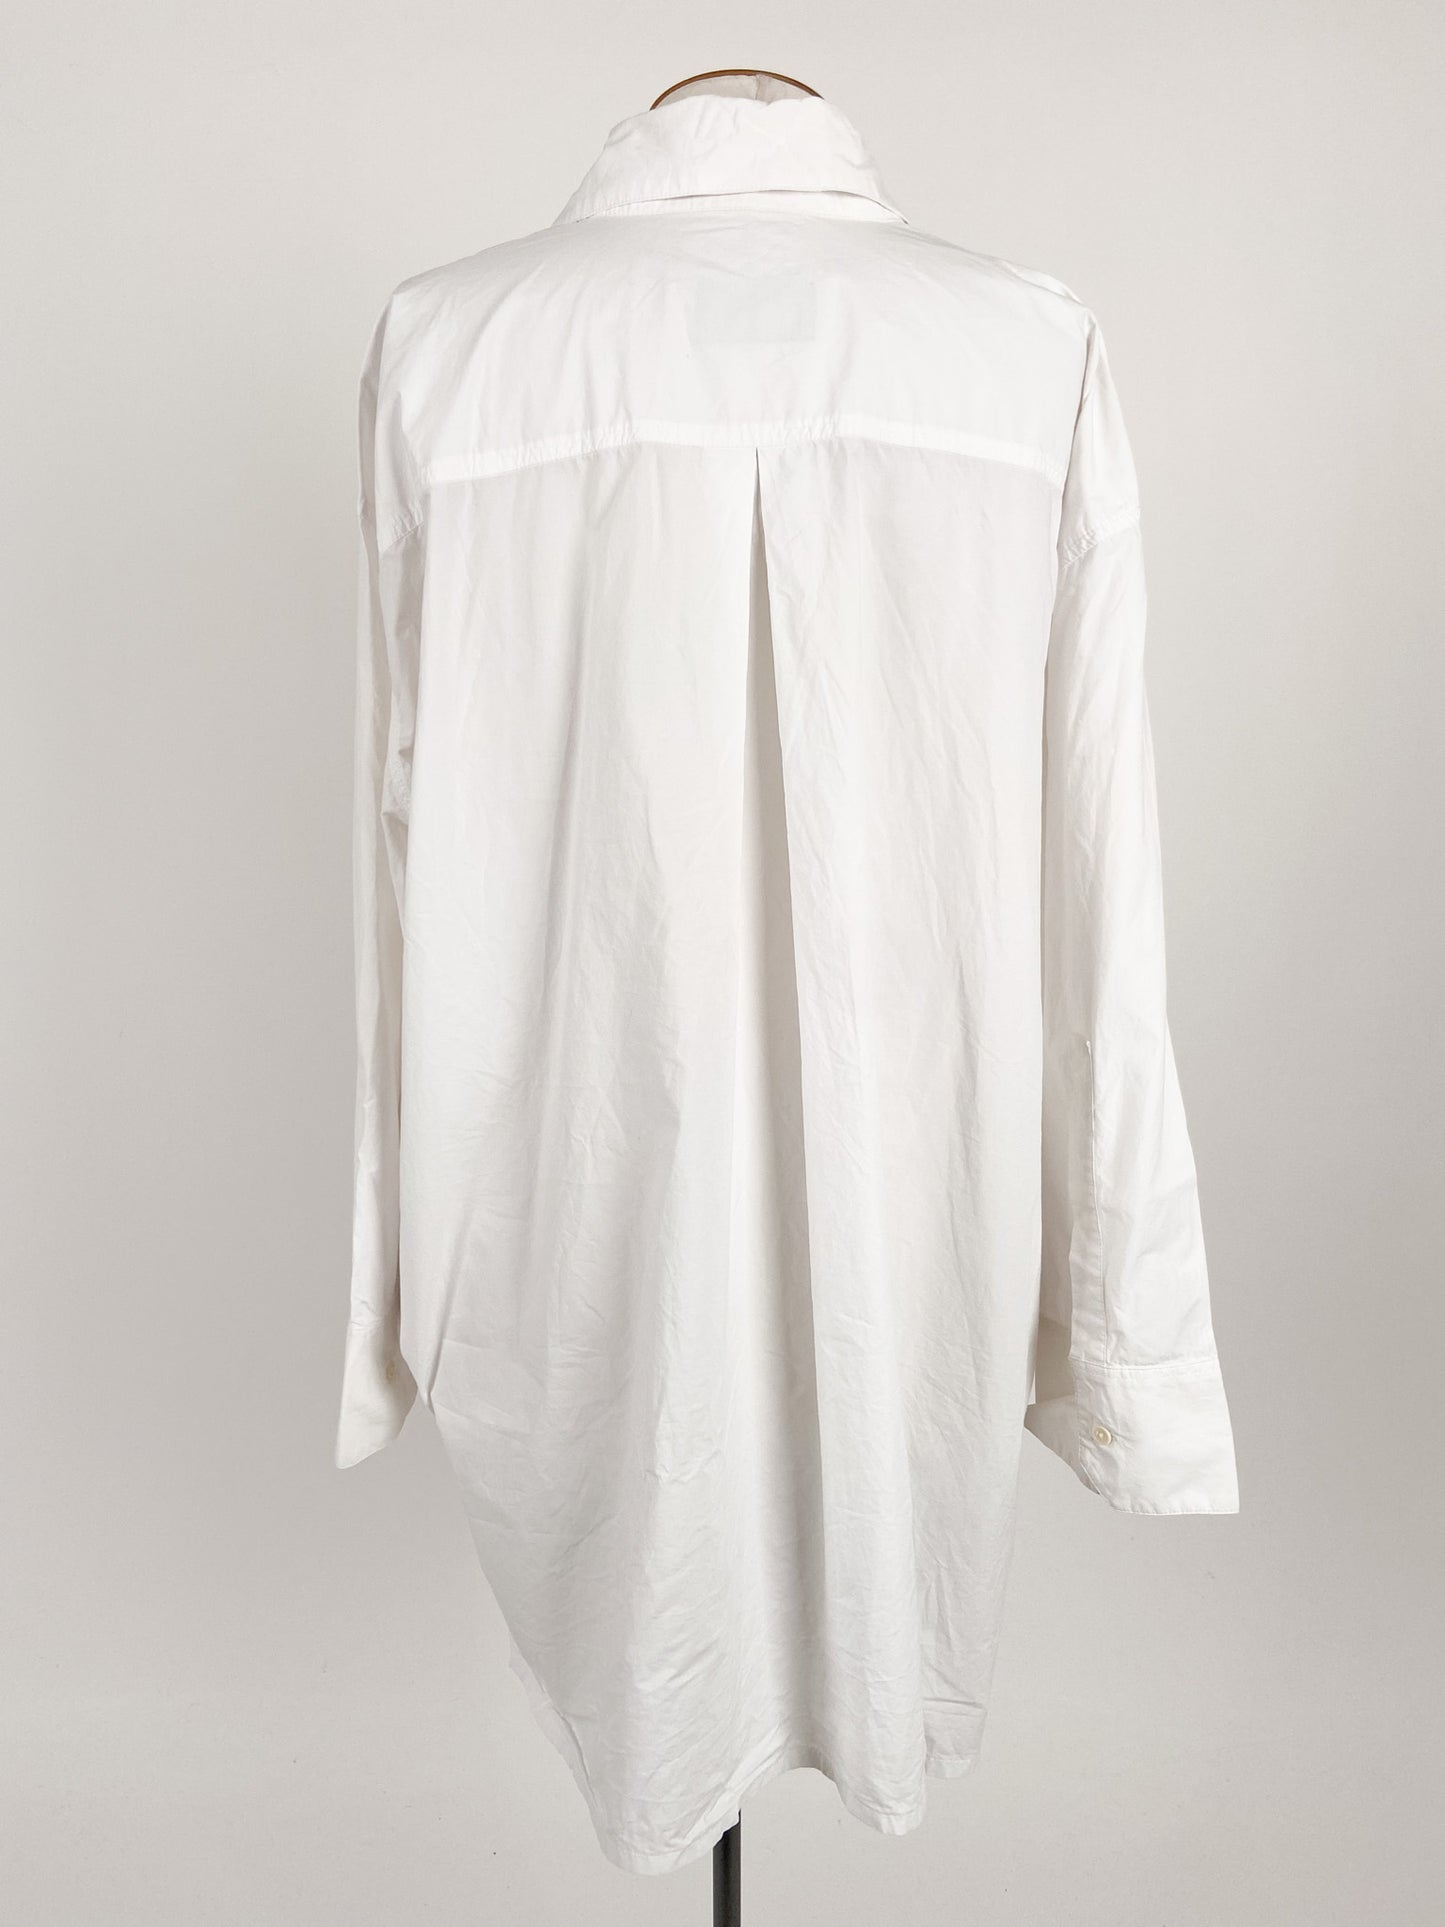 Nom*d | White Casual Top | Size M